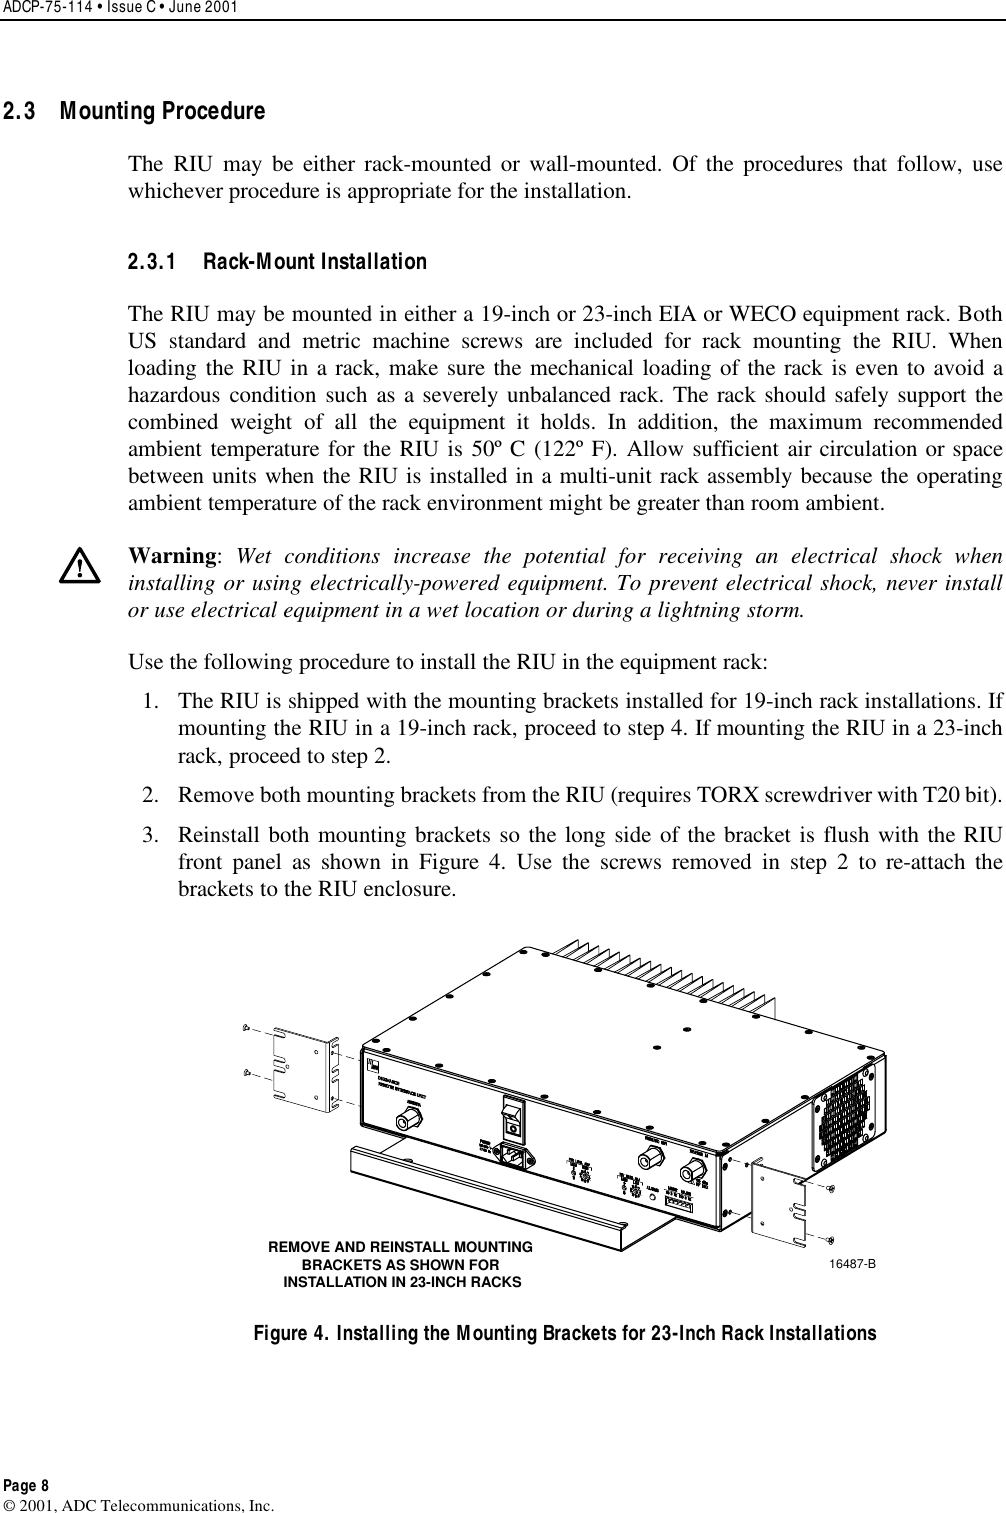 ADCP-75-114 • Issue C • June 2001 Page 8 ©2001, ADC Telecommunications, Inc.2.3 Mounting Procedure The RIU may be either rack-mounted or wall-mounted. Of the procedures that follow, usewhichever procedure is appropriate for the installation.2.3.1 Rack-Mount Installation The RIU may be mounted in either a19-inch or 23-inch EIA or WECO equipment rack. BothUS standard and metric machine screws are included for rack mounting the RIU. Whenloading the RIU in arack, make sure the mechanical loading of the rack is even to avoid ahazardous condition such as aseverely unbalanced rack. The rack should safely support thecombined weight of all the equipment it holds. In addition, the maximum recommendedambient temperature for the RIU is 50º C (122º F). Allow sufficient air circulation or spacebetween units when the RIU is installed in amulti-unit rack assembly because the operatingambient temperature of the rack environment might be greater than room ambient.Warning:Wet conditions increase the potential for receiving an electrical shock wheninstalling or using electrically-powered equipment. To prevent electrical shock, never installor use electrical equipment in awet location or during alightning storm.Use the following procedure to install the RIU in the equipment rack:1. The RIU is shipped with the mounting brackets installed for 19-inch rack installations. Ifmounting the RIU in a19-inch rack, proceed to step 4. If mounting the RIU in a23-inchrack, proceed to step 2.2. Remove both mounting brackets from the RIU (requires TORX screwdriver with T20 bit).3. Reinstall both mounting brackets so the long side of the bracket is flush with the RIUfront panel as shown in Figure 4. Use the screws removed in step 2to re-attach thebrackets to the RIU enclosure.16487-BREMOVE AND REINSTALL MOUNTINGBRACKETS AS SHOWN FOR INSTALLATION IN 23-INCH RACKSFigure 4. Installing the Mounting Brackets for 23-Inch Rack Installations 